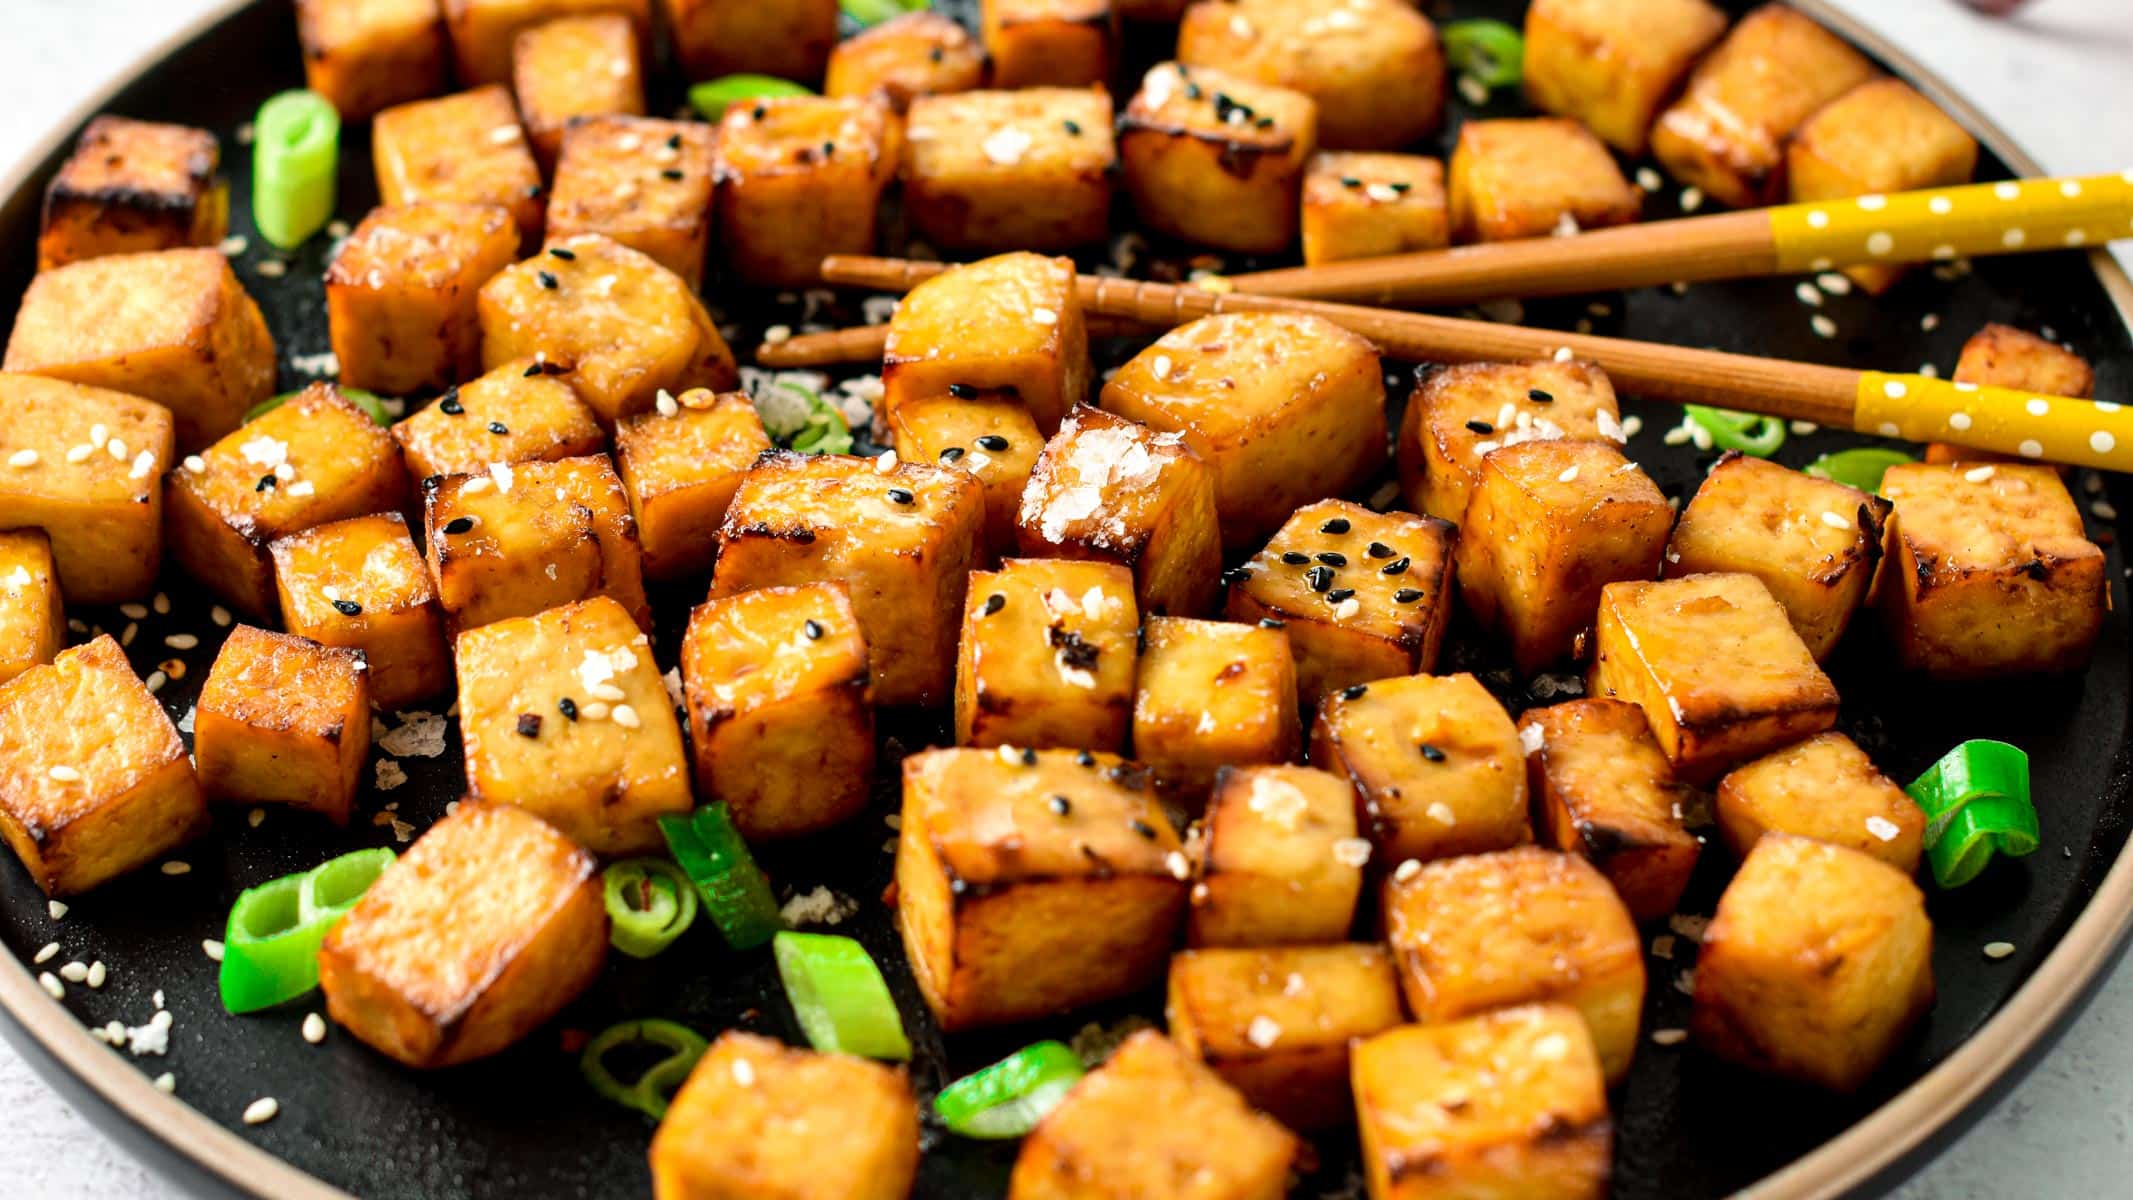  This Tofu Marinade is the most easy marinade to add tofu a real deep flavor and turn any tofu recipes into a delicious meal. Plus, this marinade take 5 minutes to whip and it's naturally gluten-free, dairy-free and vegan.